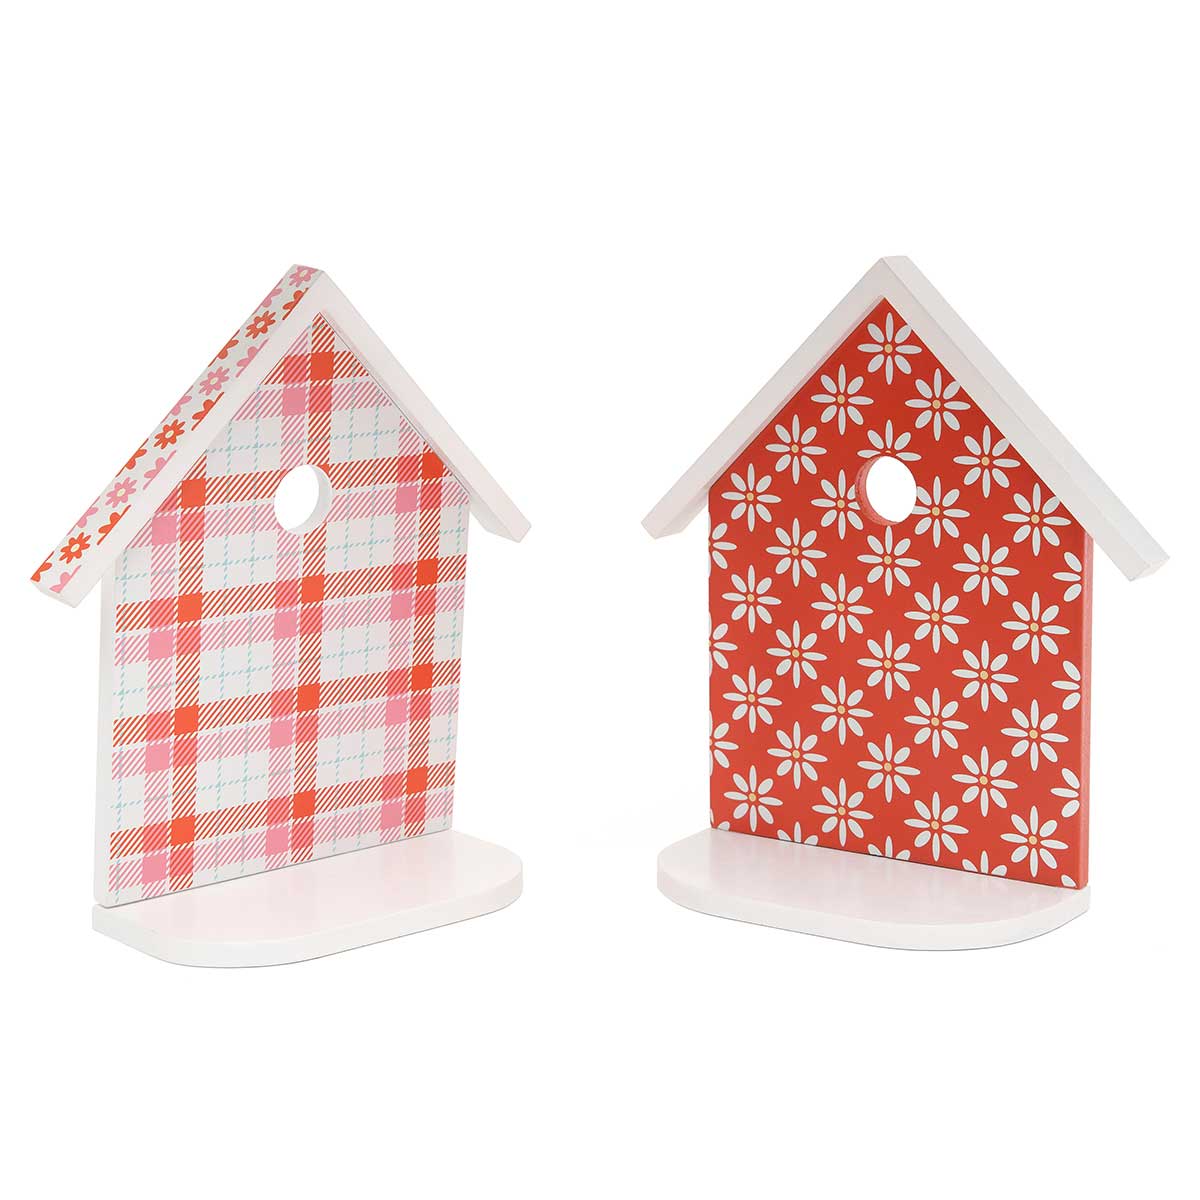 BIRDHOUSE SHELF CORAL 2 ASSORTED 8IN X 3.25IN X 9IN WOOD